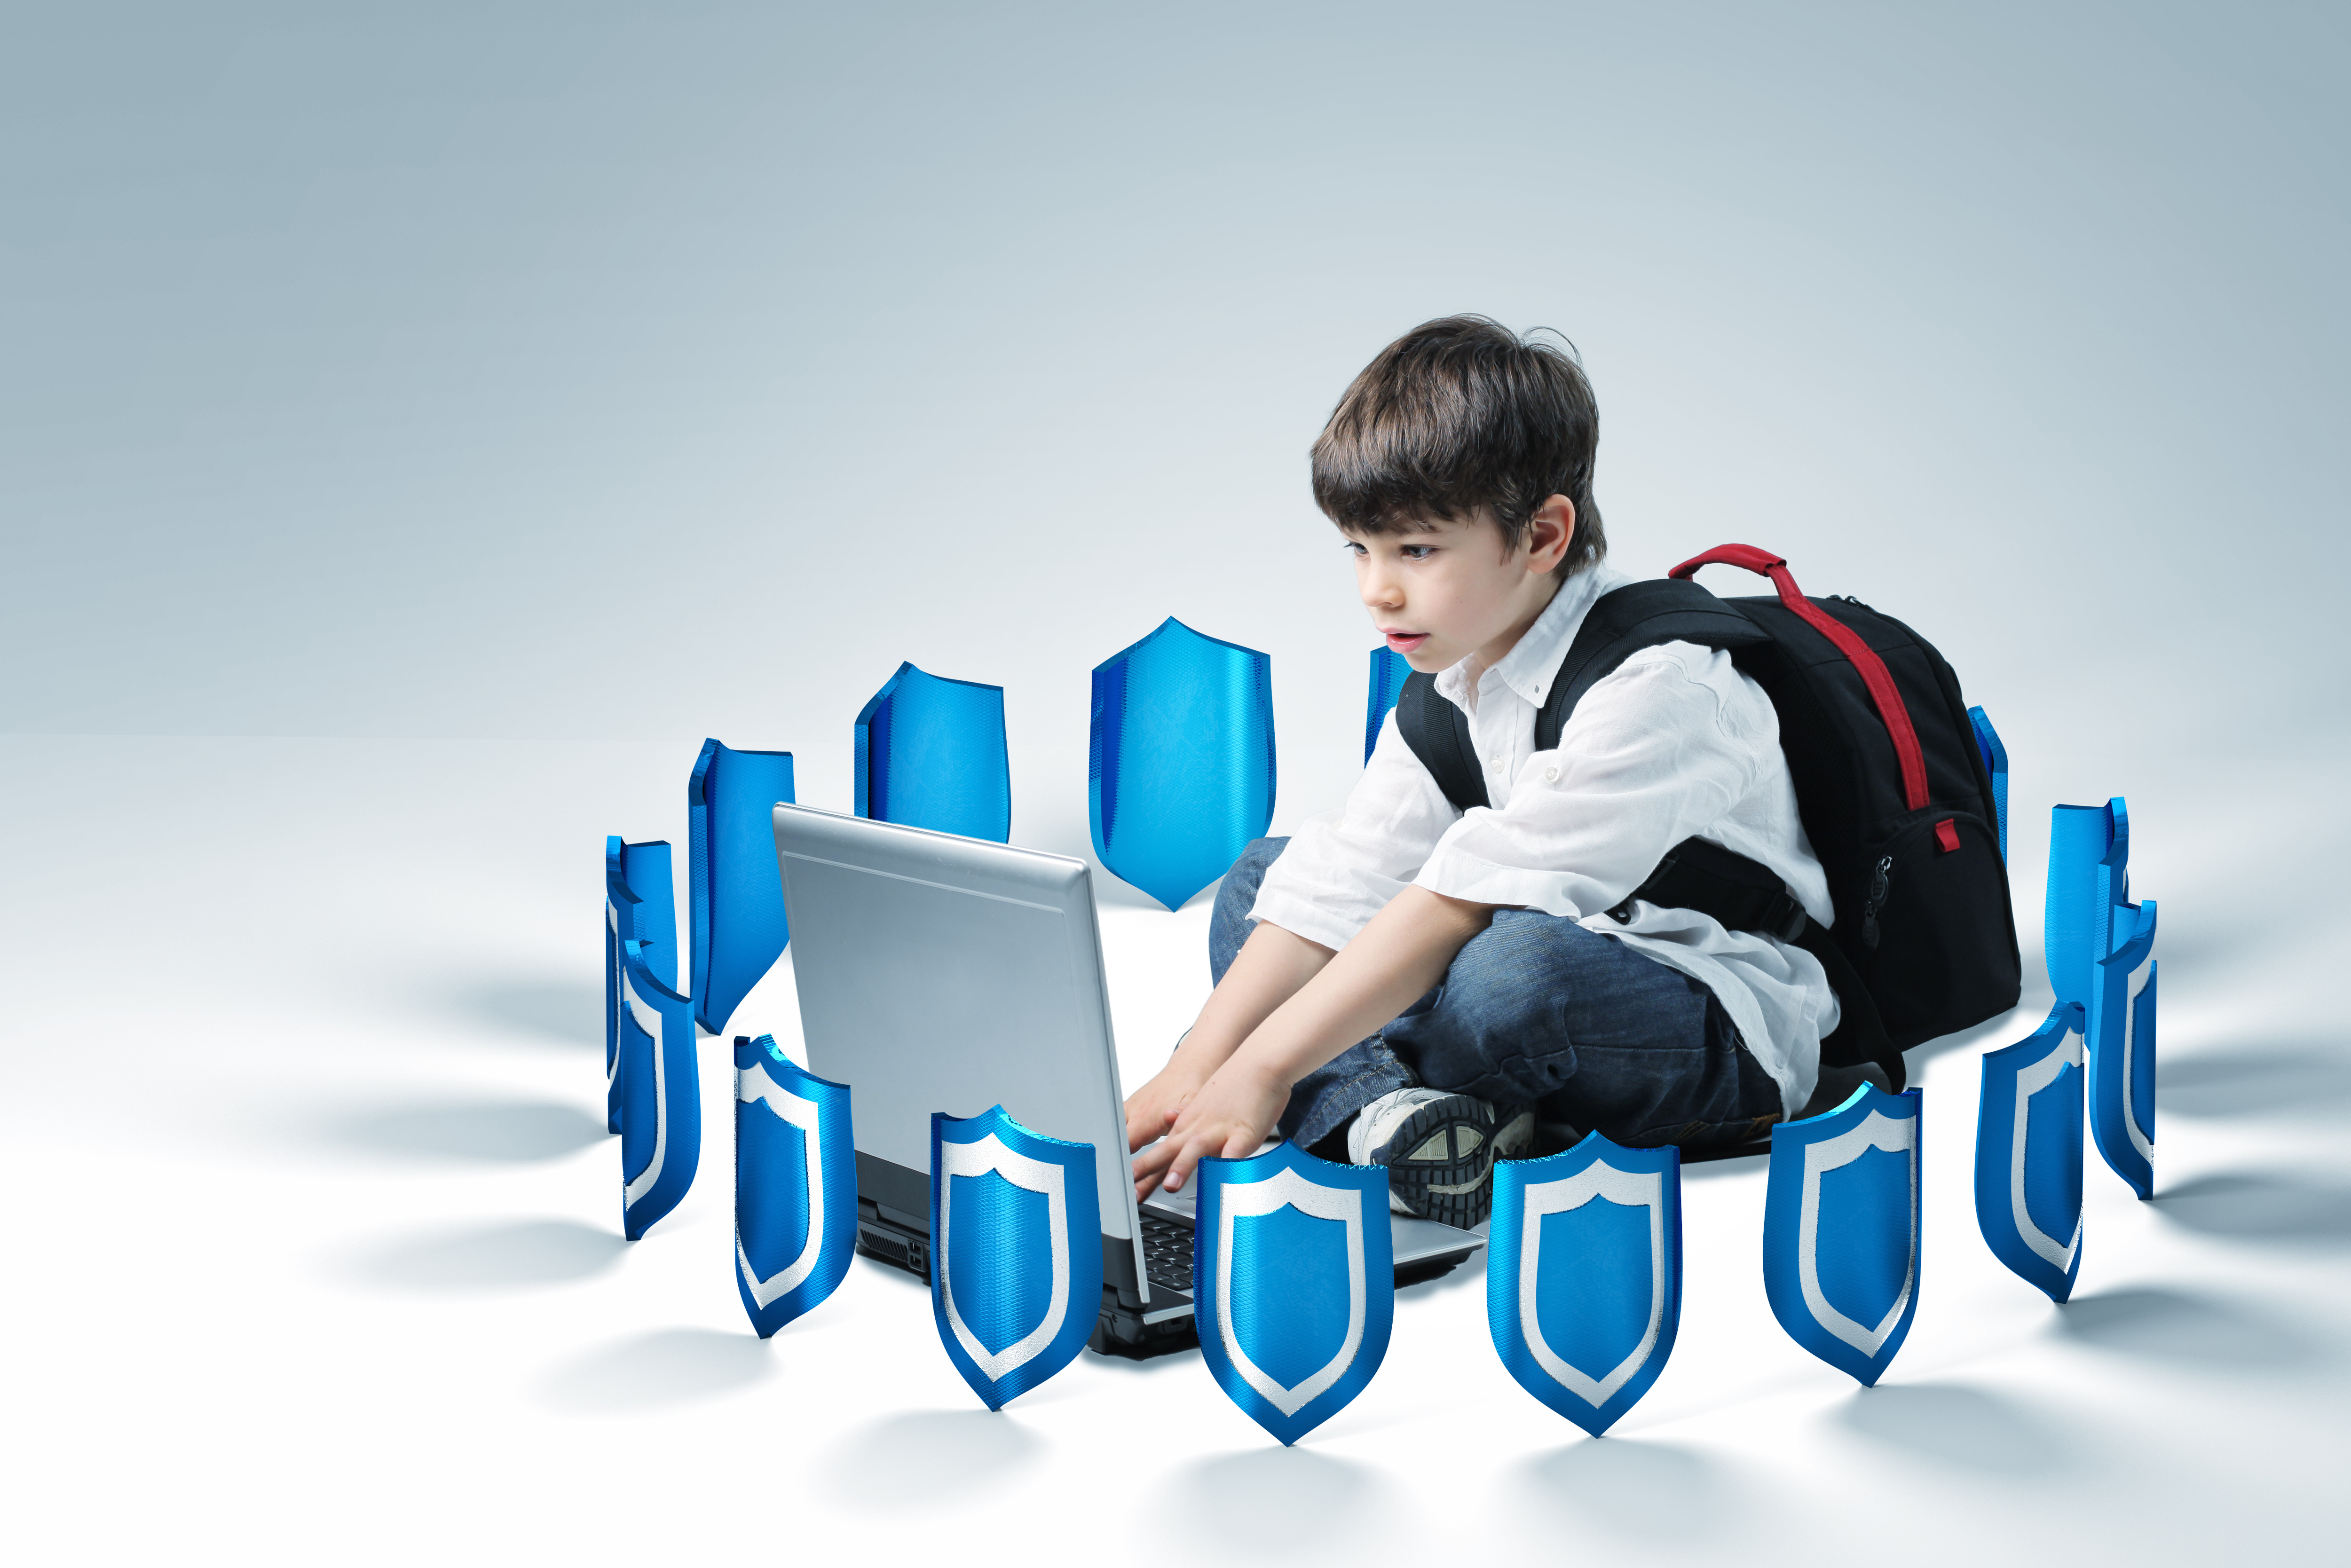 a child using a computer surrounded by shields